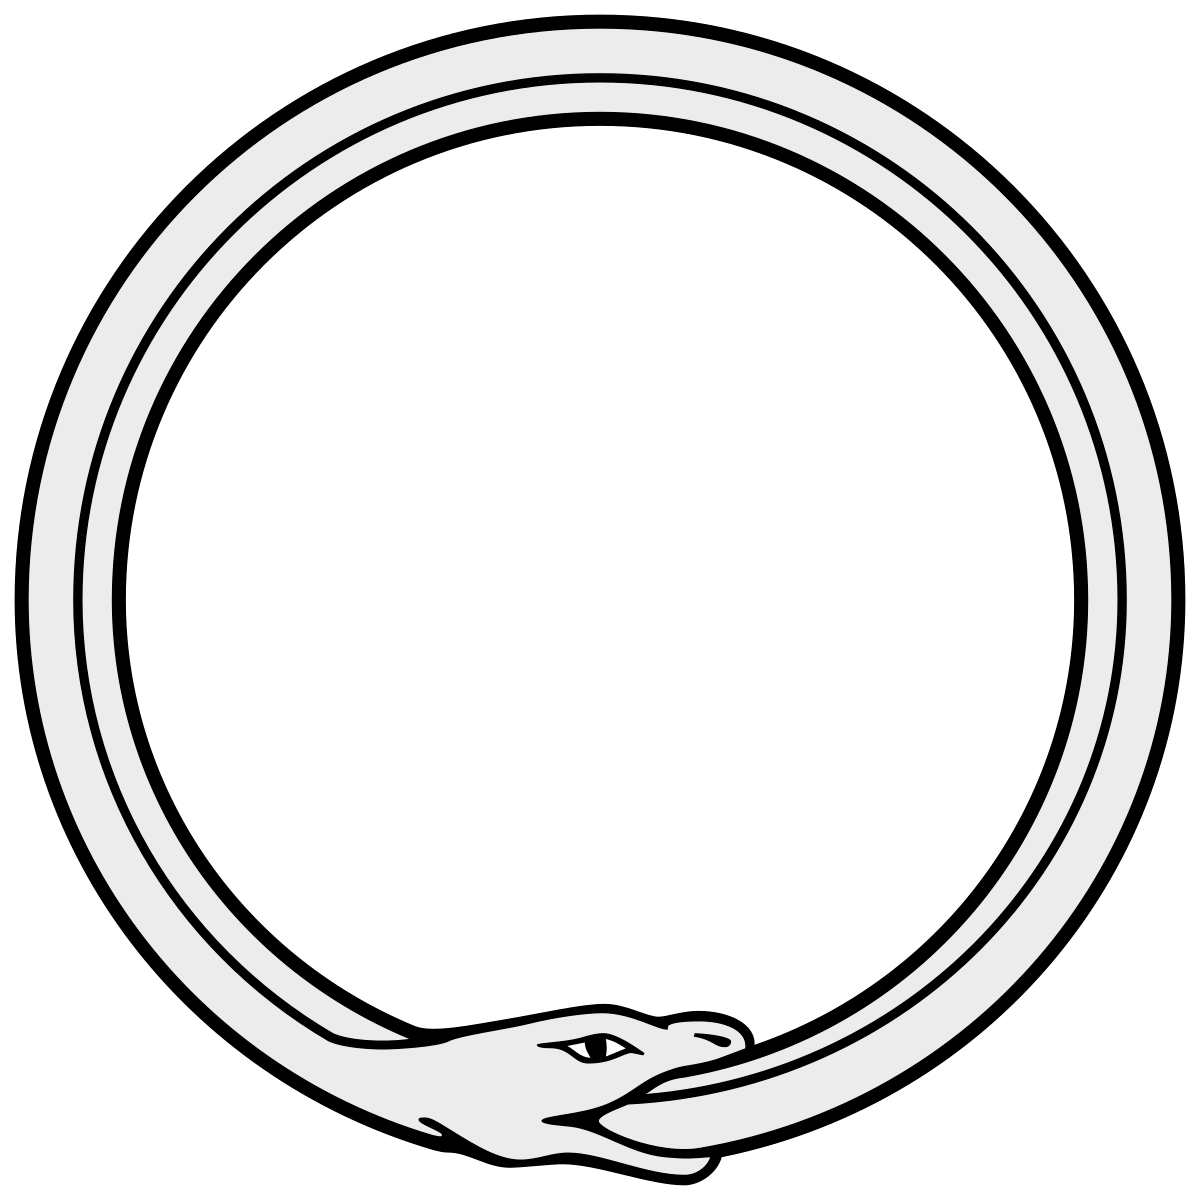 An Ouroboros: a snake eating its own tail. This is a common icon of recursion.